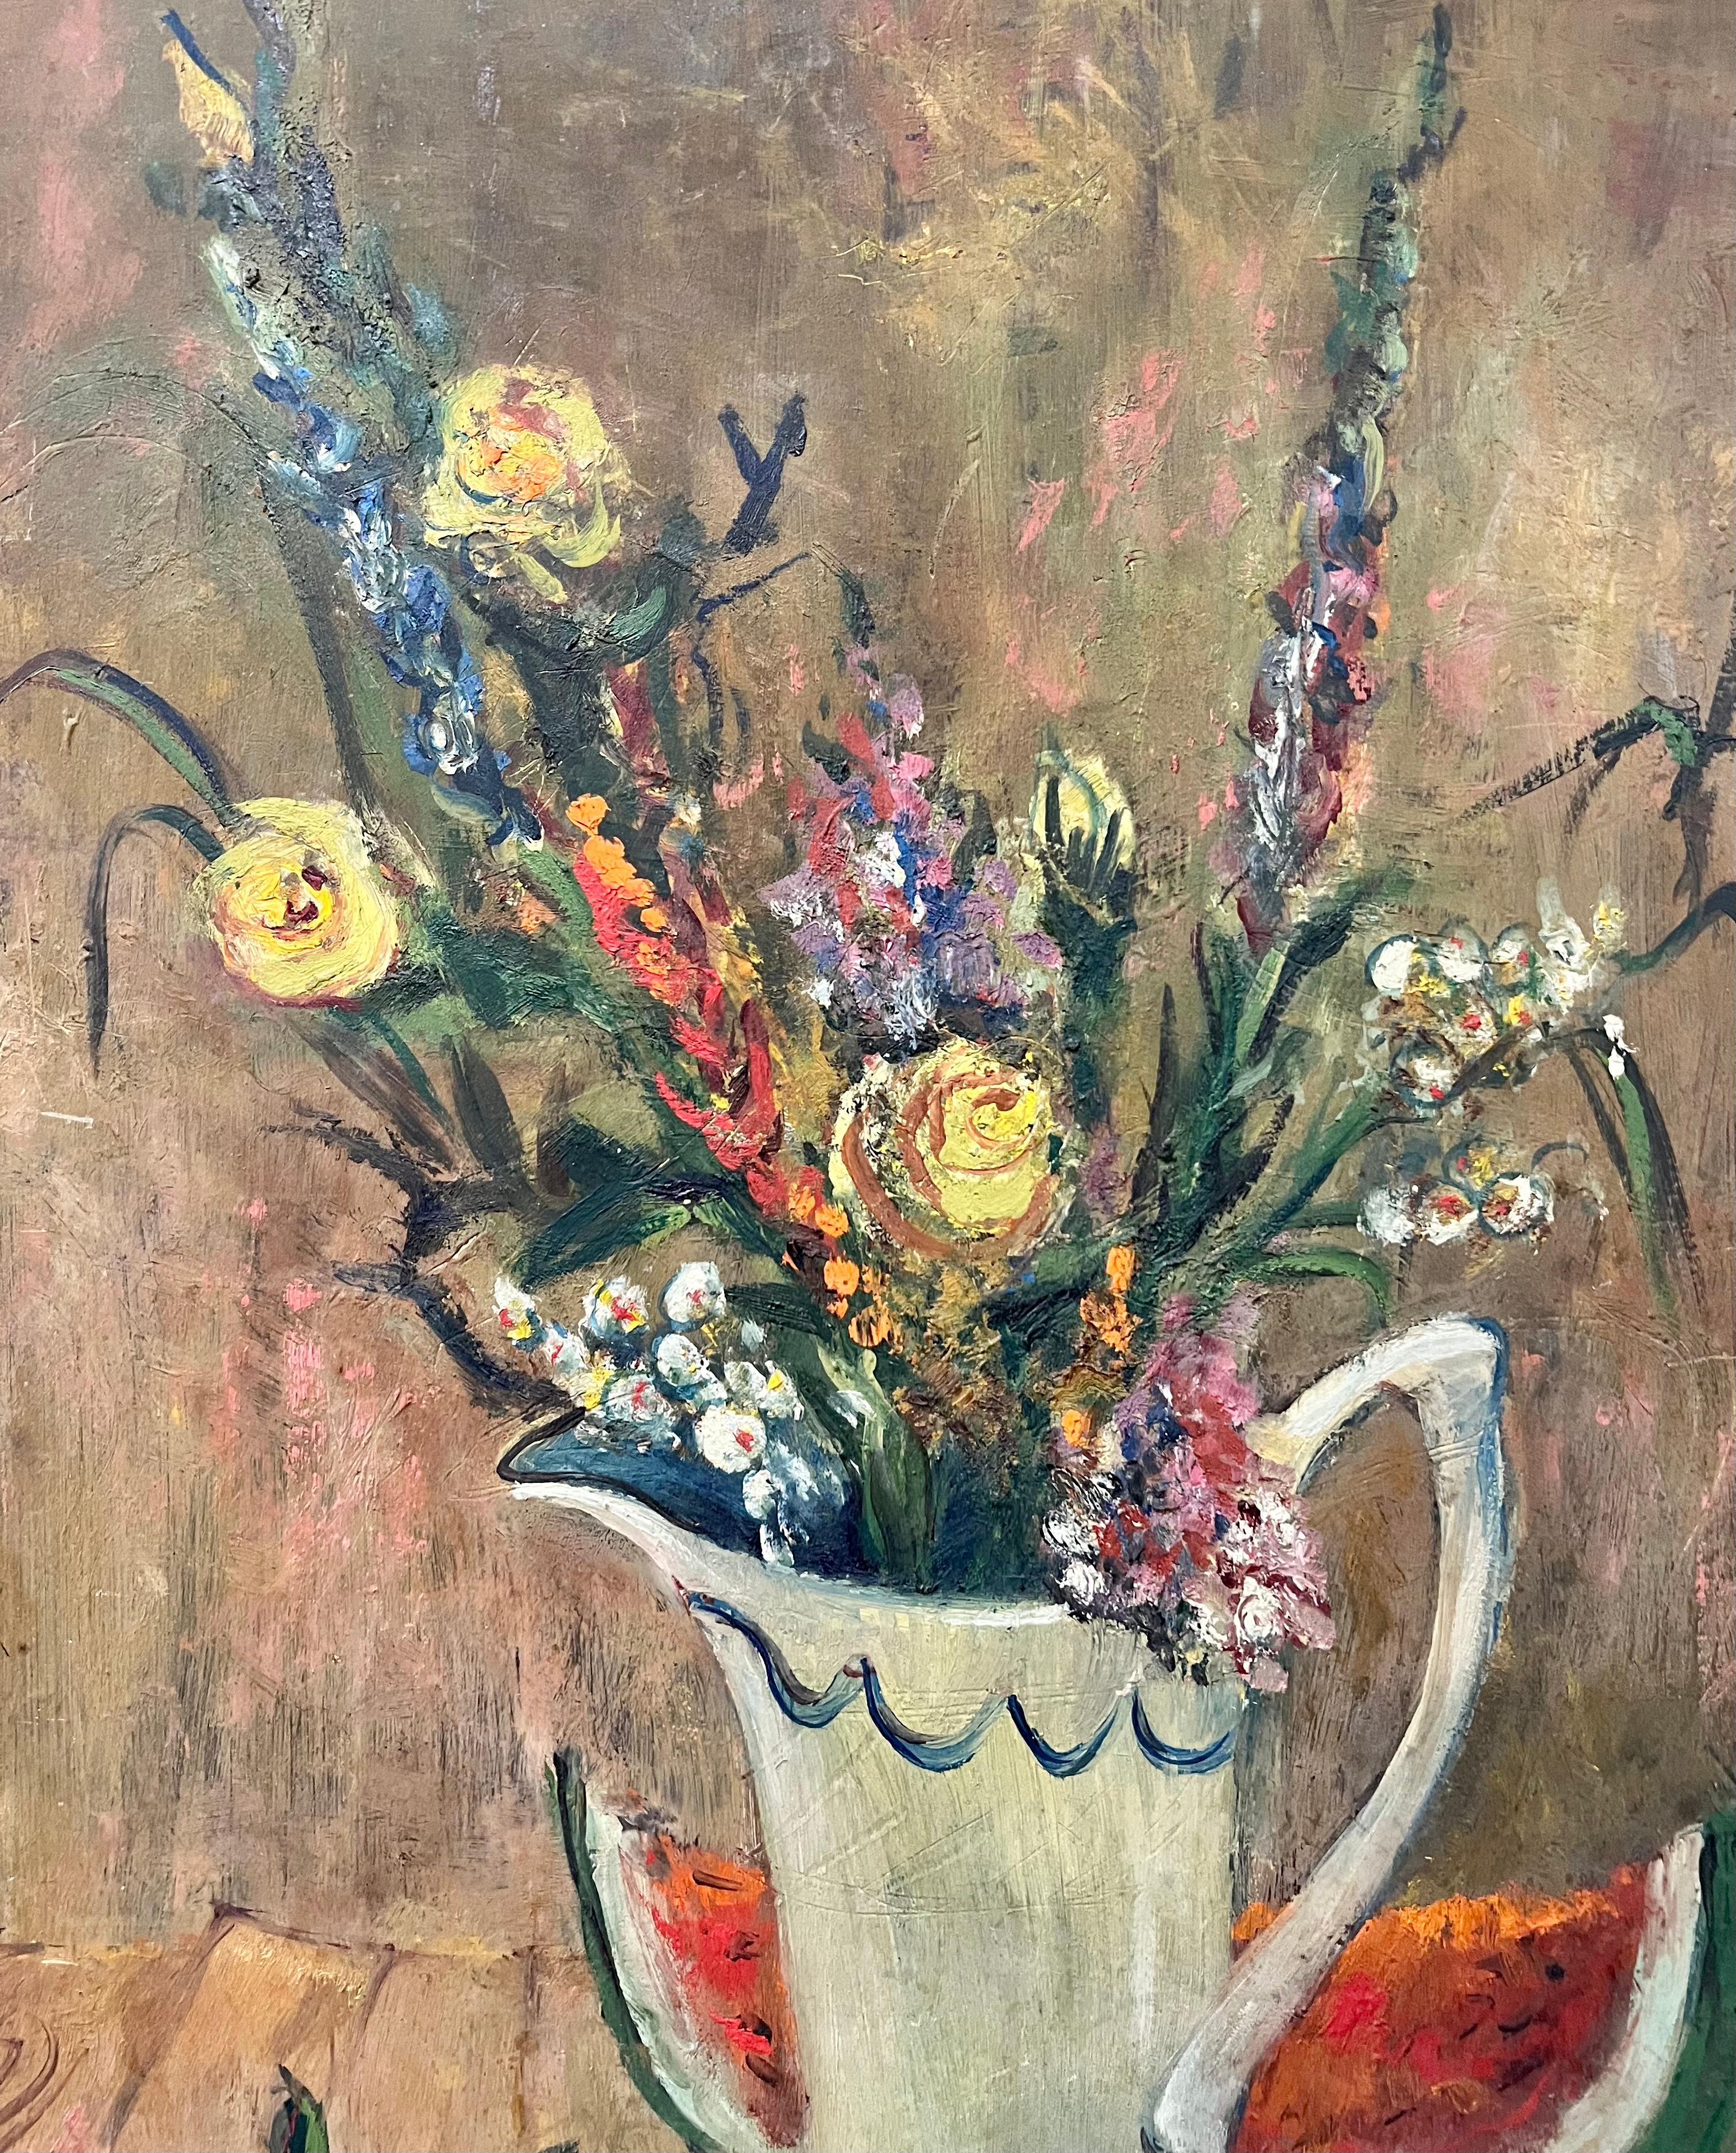 FAUVIST Still Life Flowers Fruits FEMALE American Modernist Post Impressionist - Post-Impressionist Painting by Jane Wilson